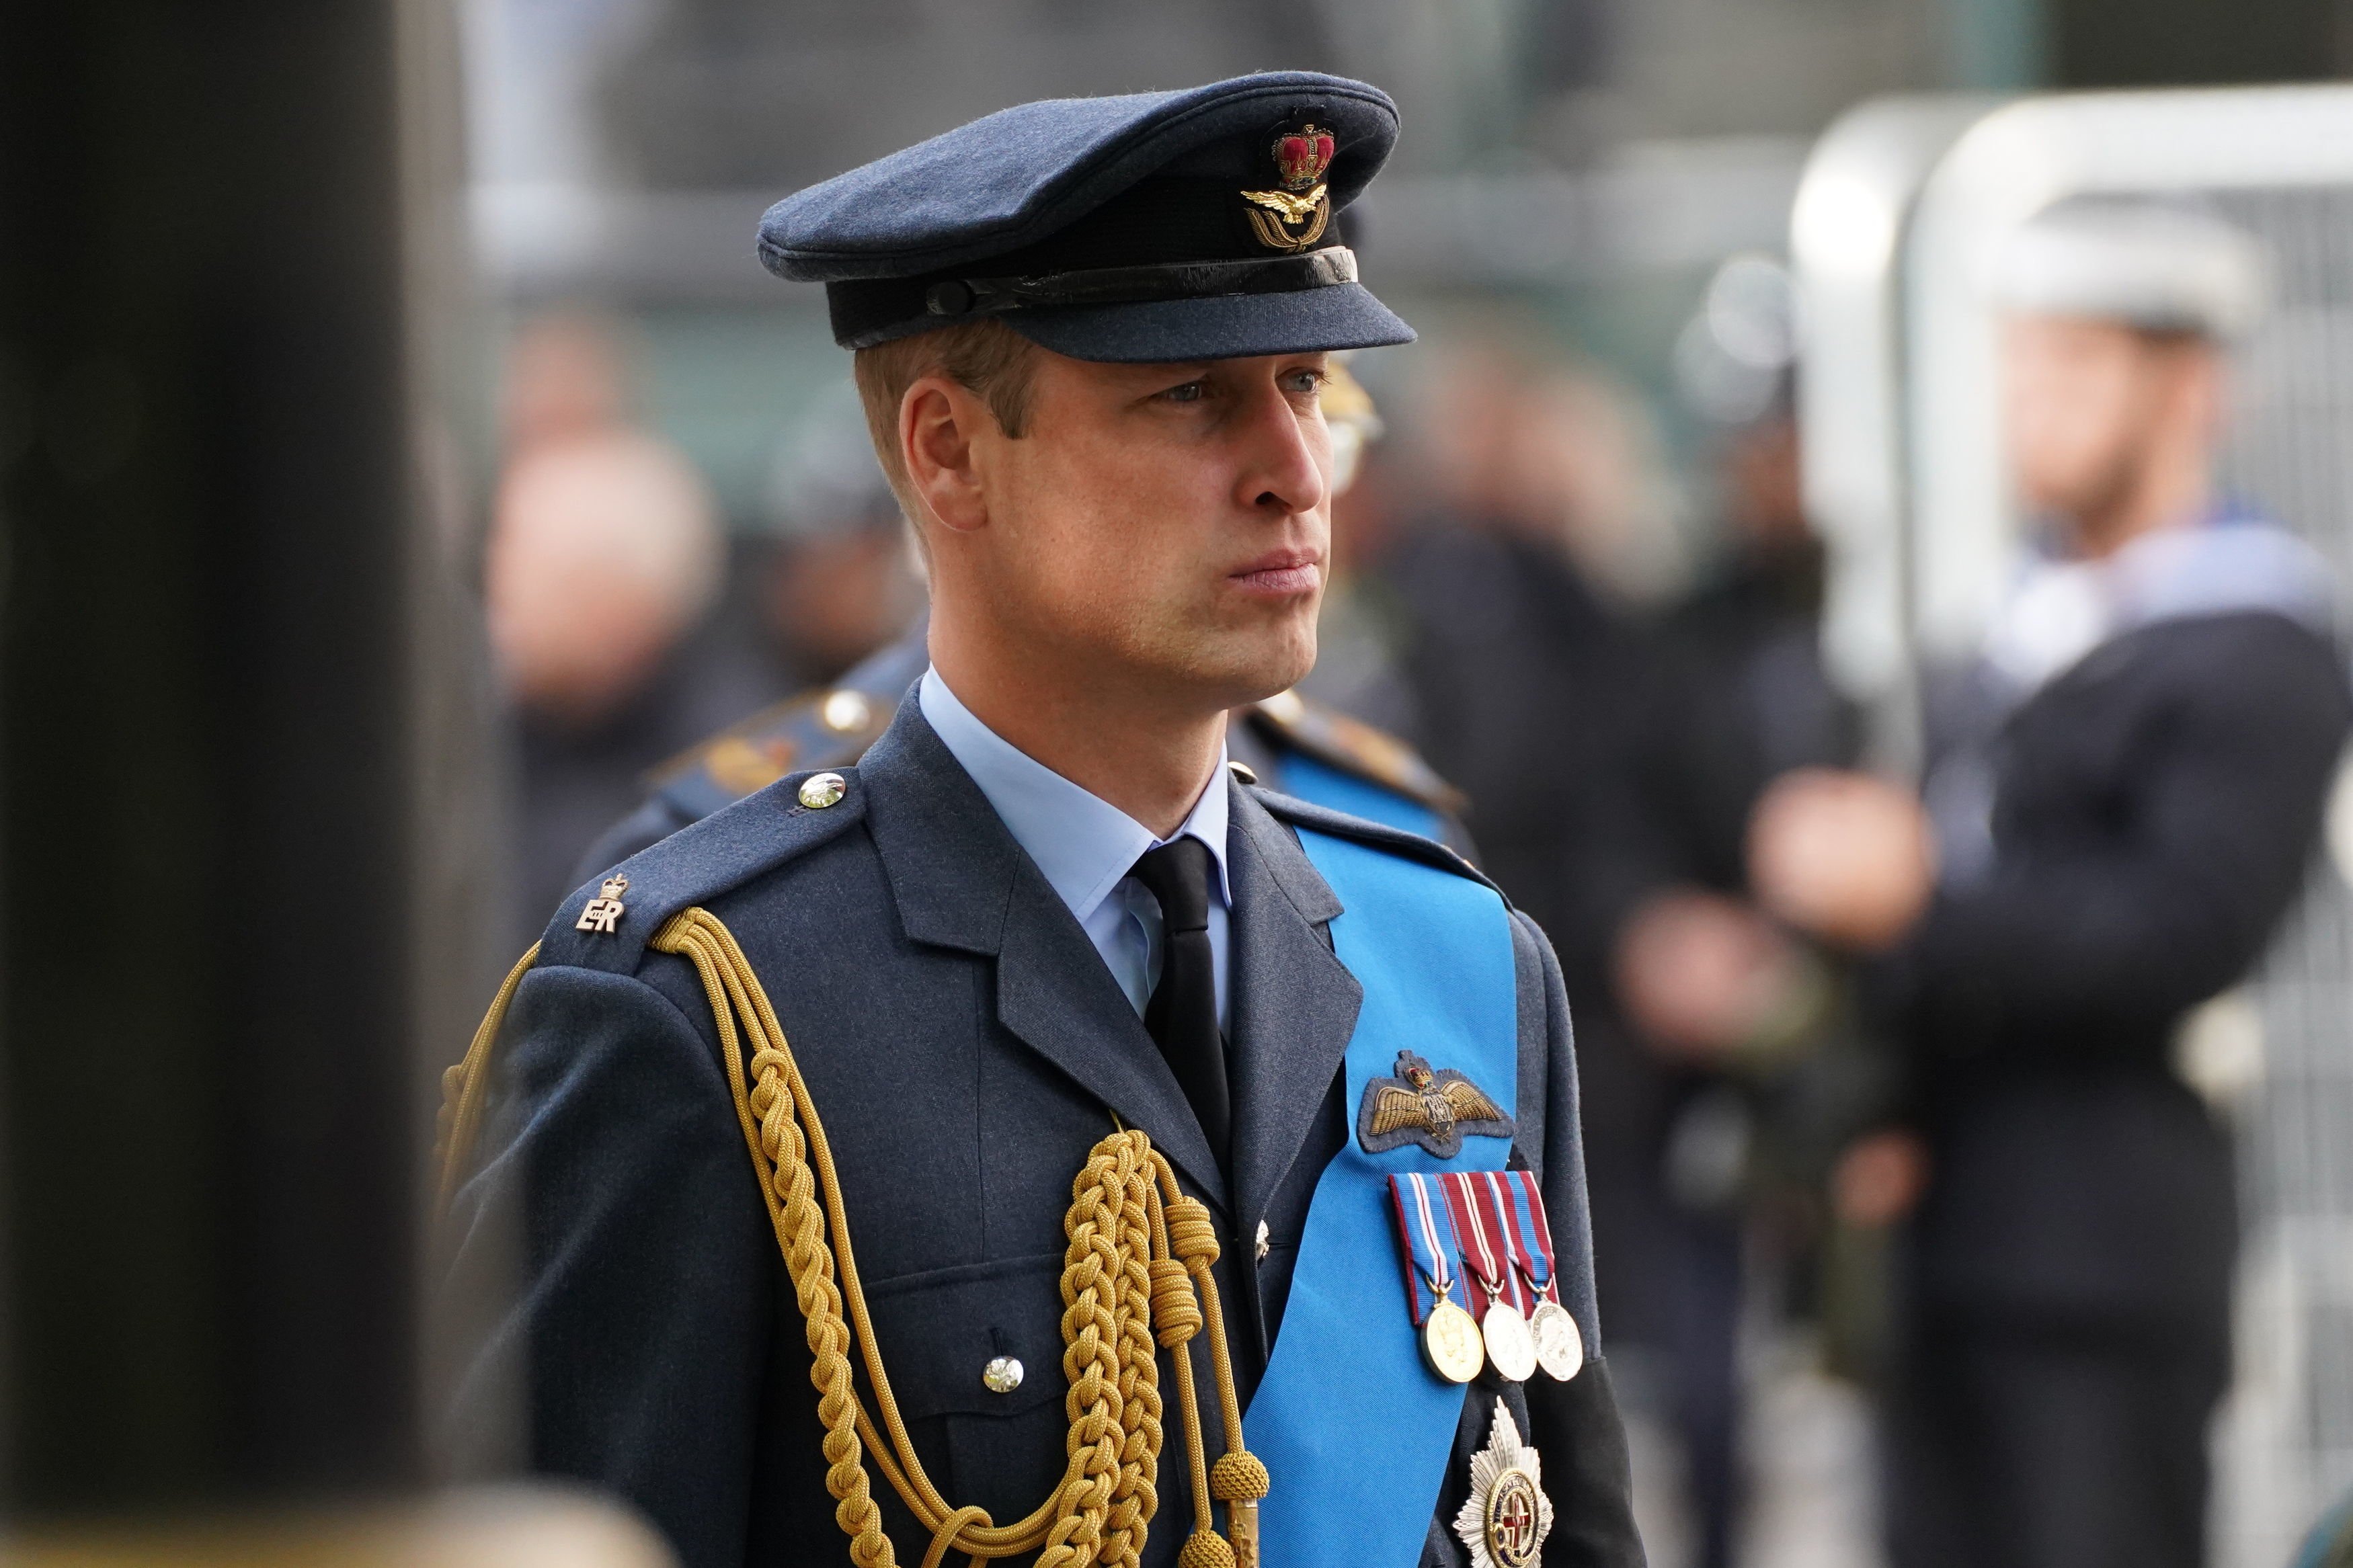 Prince William following the coffin of Queen Elizabeth II as it leaves Westminster Abbey